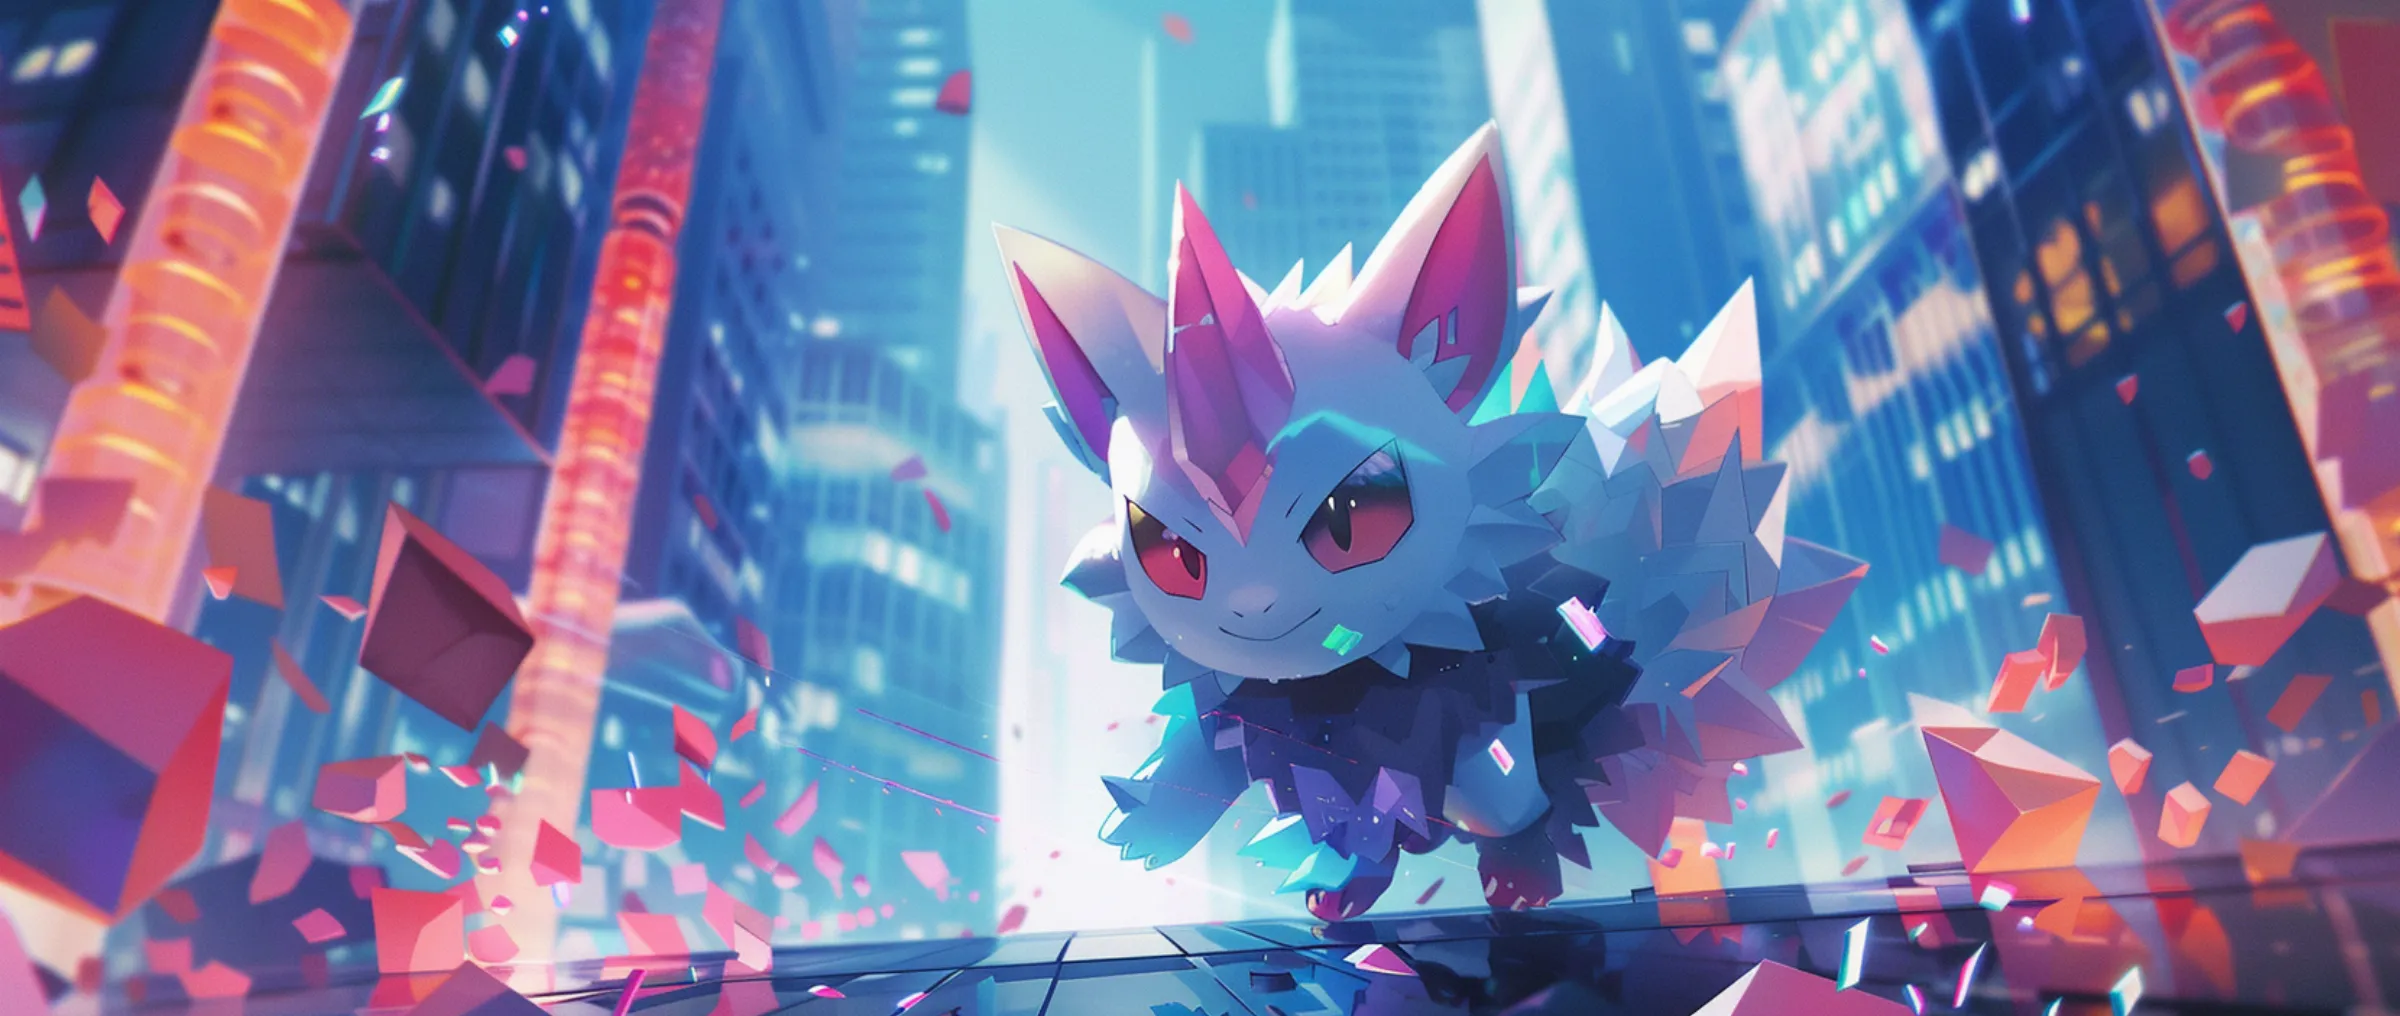 The leader of Pixelmon bets on fractional NFTs